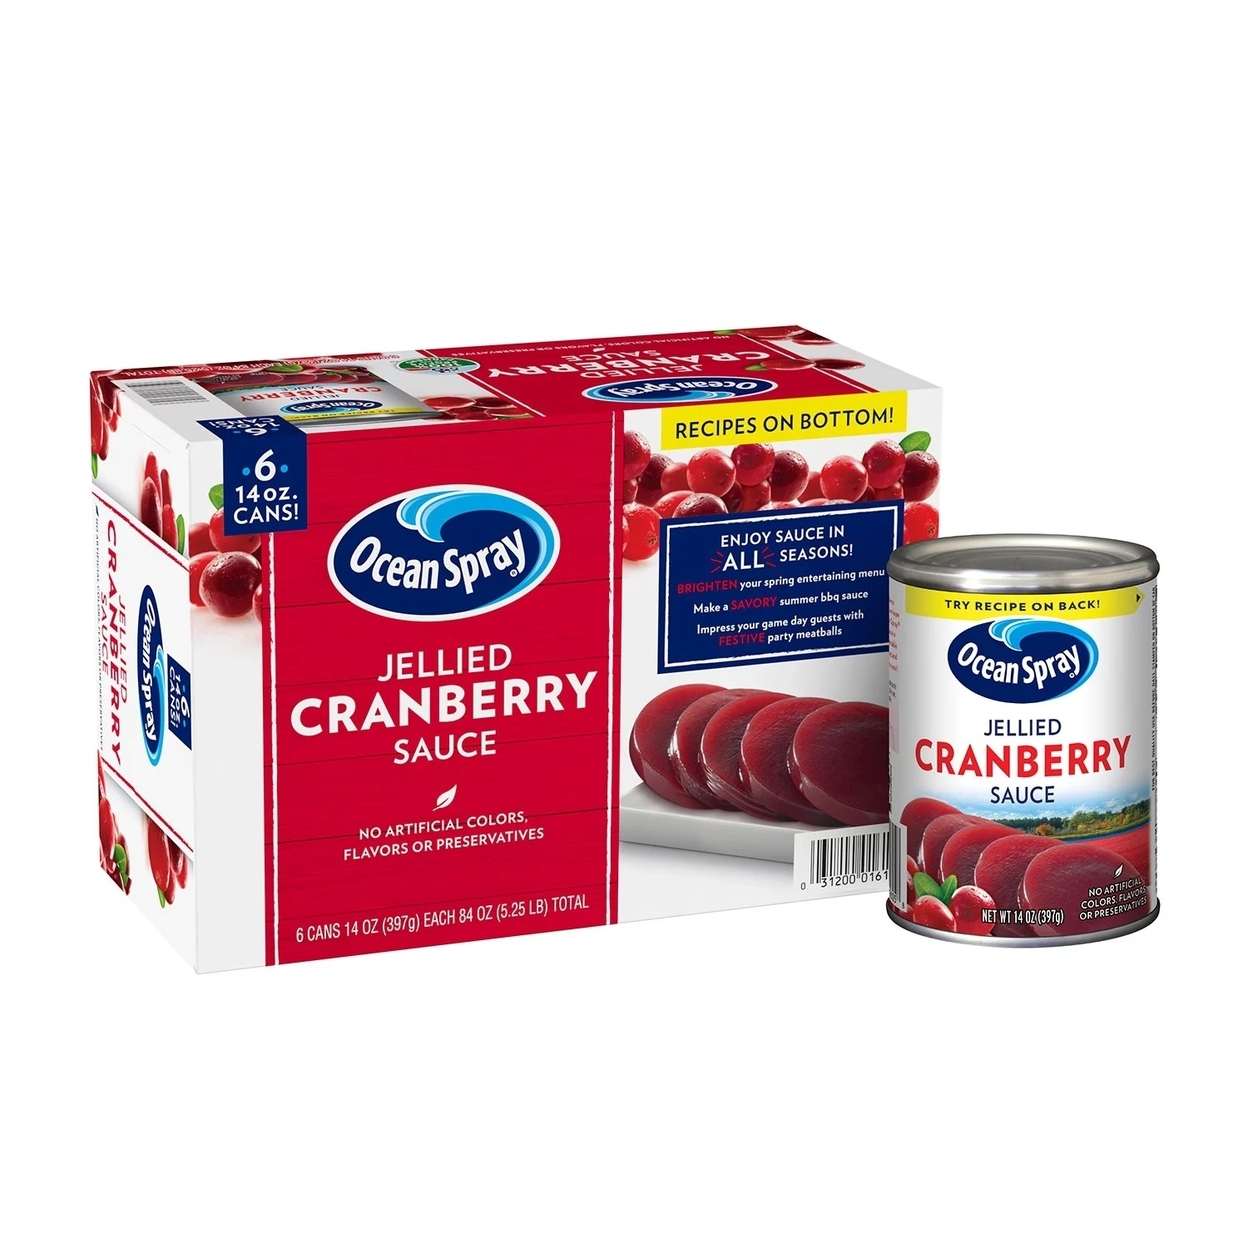 Ocean Spray Jellied Cranberry Sauce, 14 Ounce (Pack Of 6)